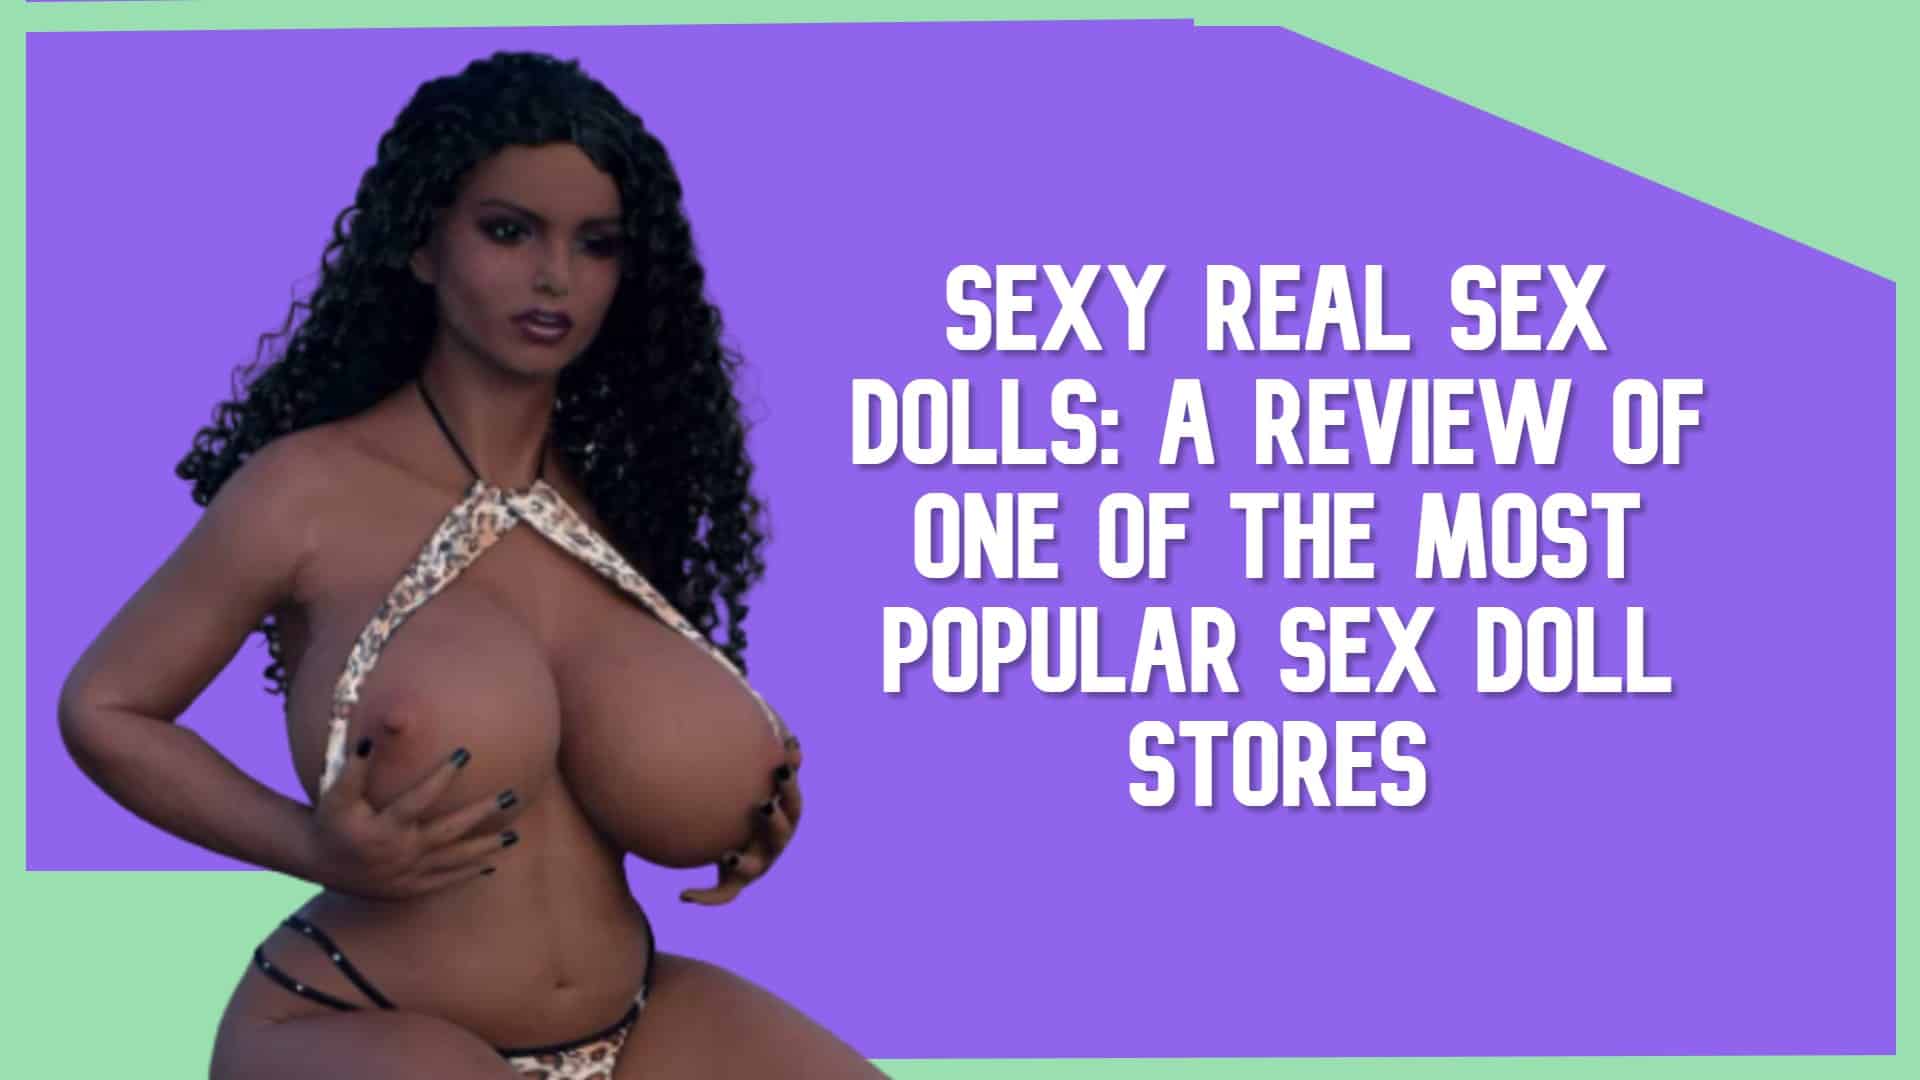 Sexy Real Sex Dolls: A Review of One of the Most Popular Sex Doll Stores